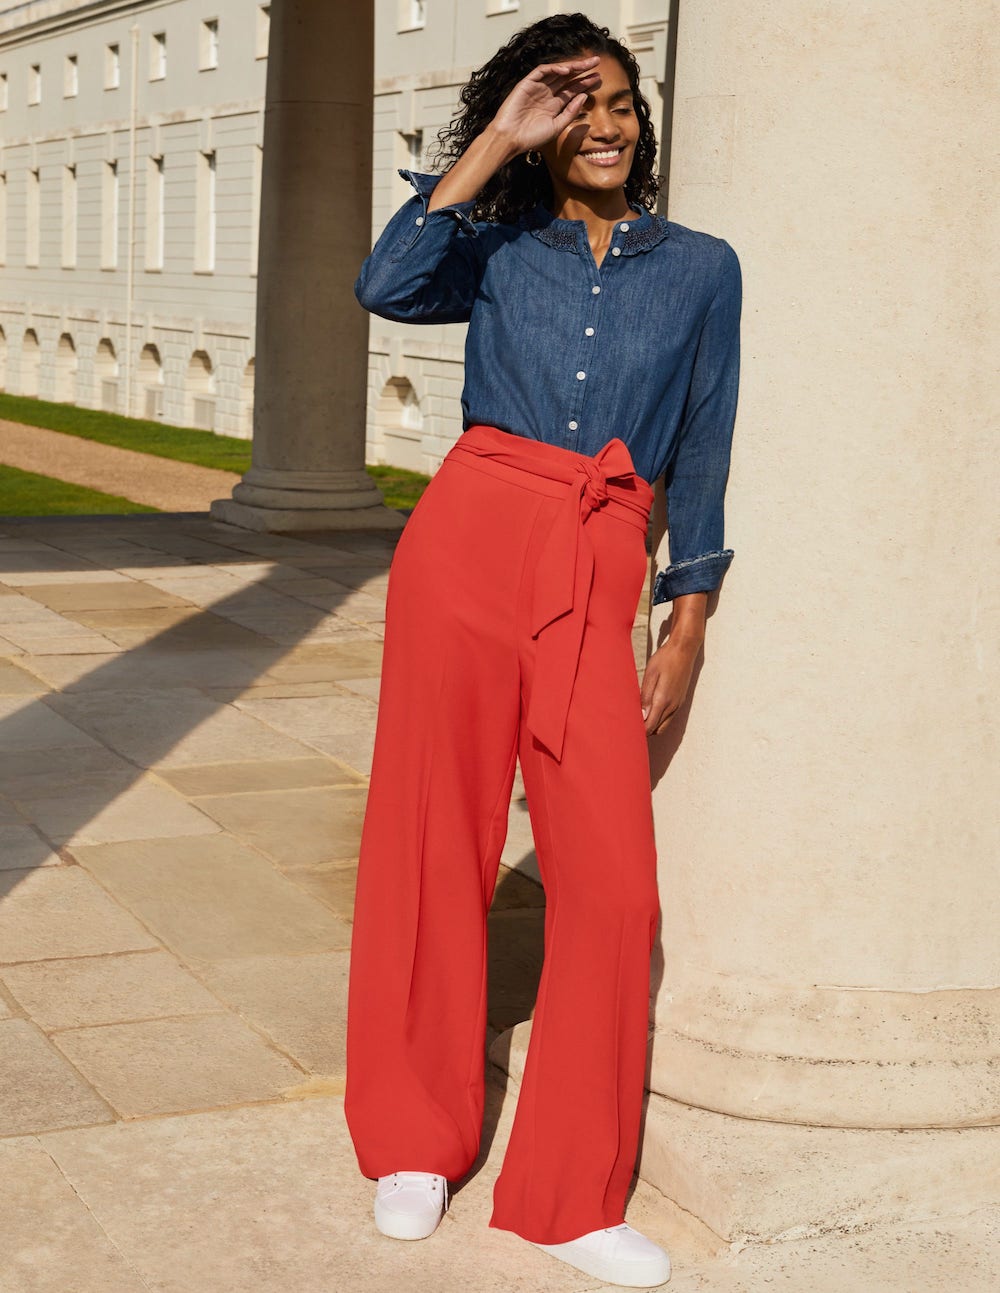 It’s time for real trousers: stylish alternatives to jeans